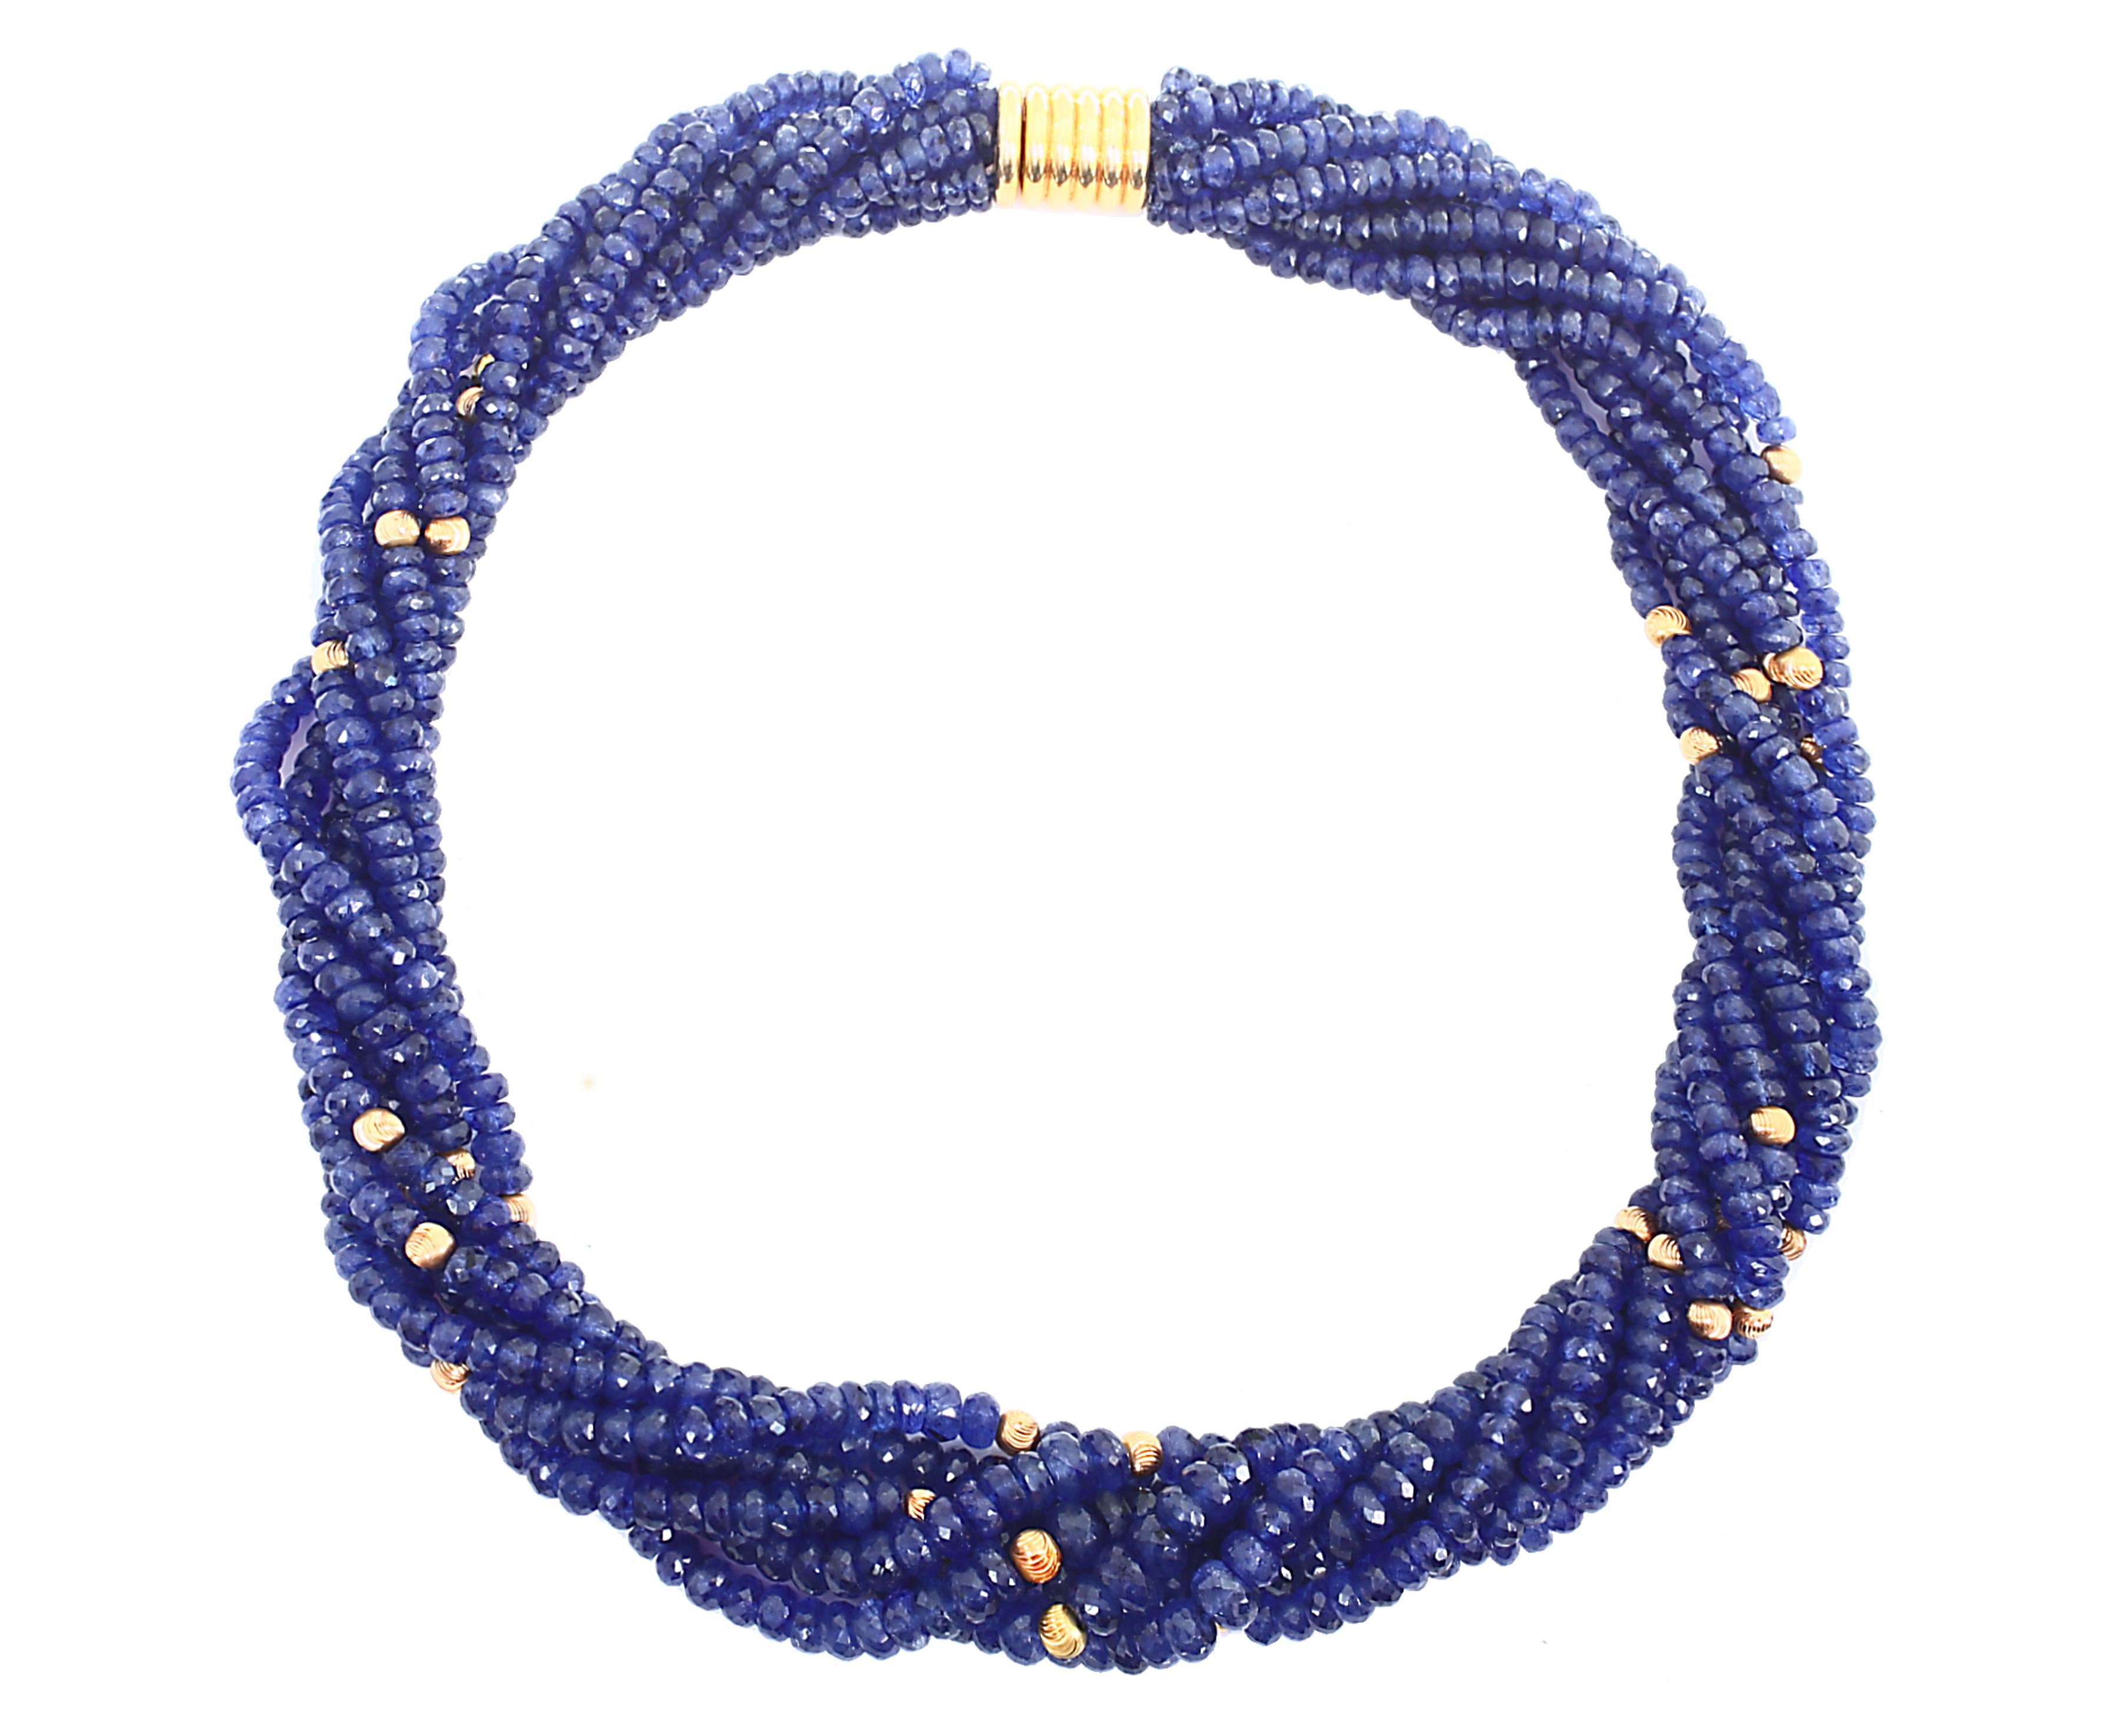 Twisted 1275 Ct Natural Tanzanite Bead Seven Strand Necklace + 15 Gm 14 K Y Gold For Sale 8